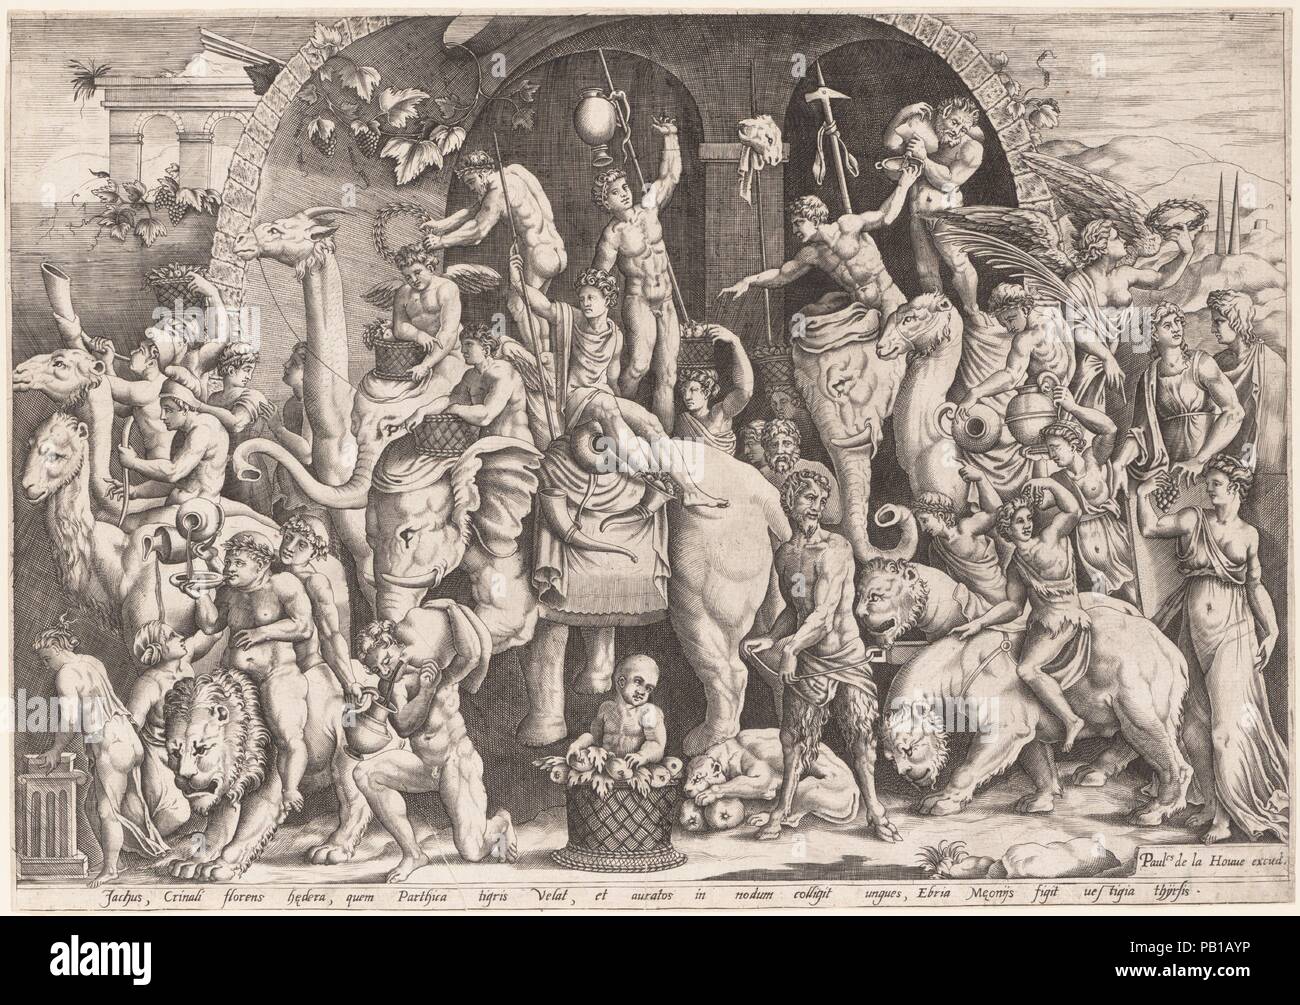 The Indian Triumph of Bacchus. Artist: Engraved by Anonymous, French, 16th century (?); Possibly copied from engraving attributed to Enea Vico (Italian, Parma 1523-1567 Ferrara). Dimensions: sheet: 10 7/8 x 15 5/8 in. (27.7 x 39.7 cm). Publisher: Published by Paul de la Houve (Paris). Date: mid-16th century. Museum: Metropolitan Museum of Art, New York, USA. Stock Photo